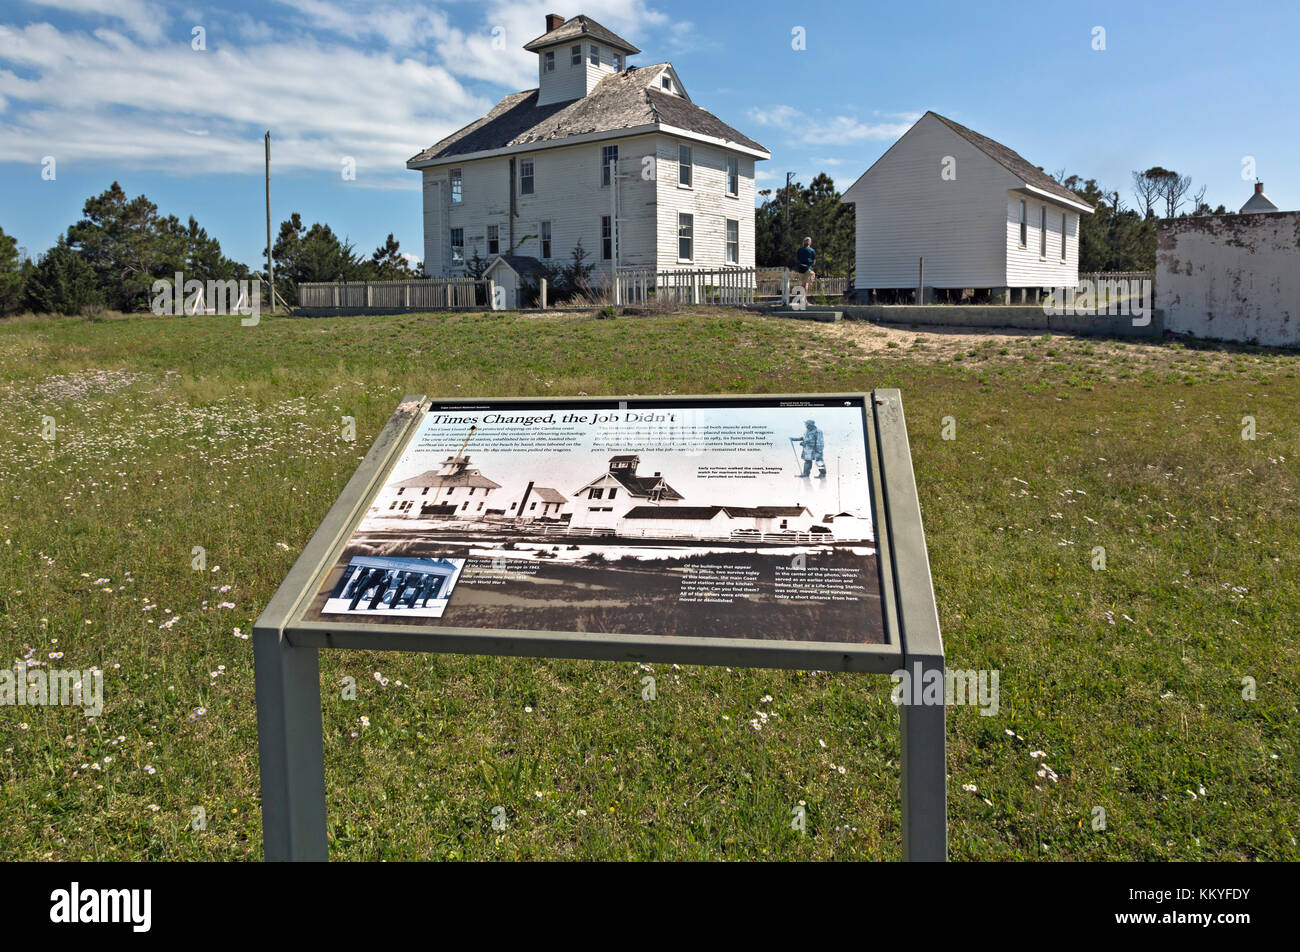 NC00998-00...NORTH CAROLINA -  The old Life Saving Station/Coast Guard Station now preserved in the Cape Lookout Historic Village area of Cape Lookout Stock Photo